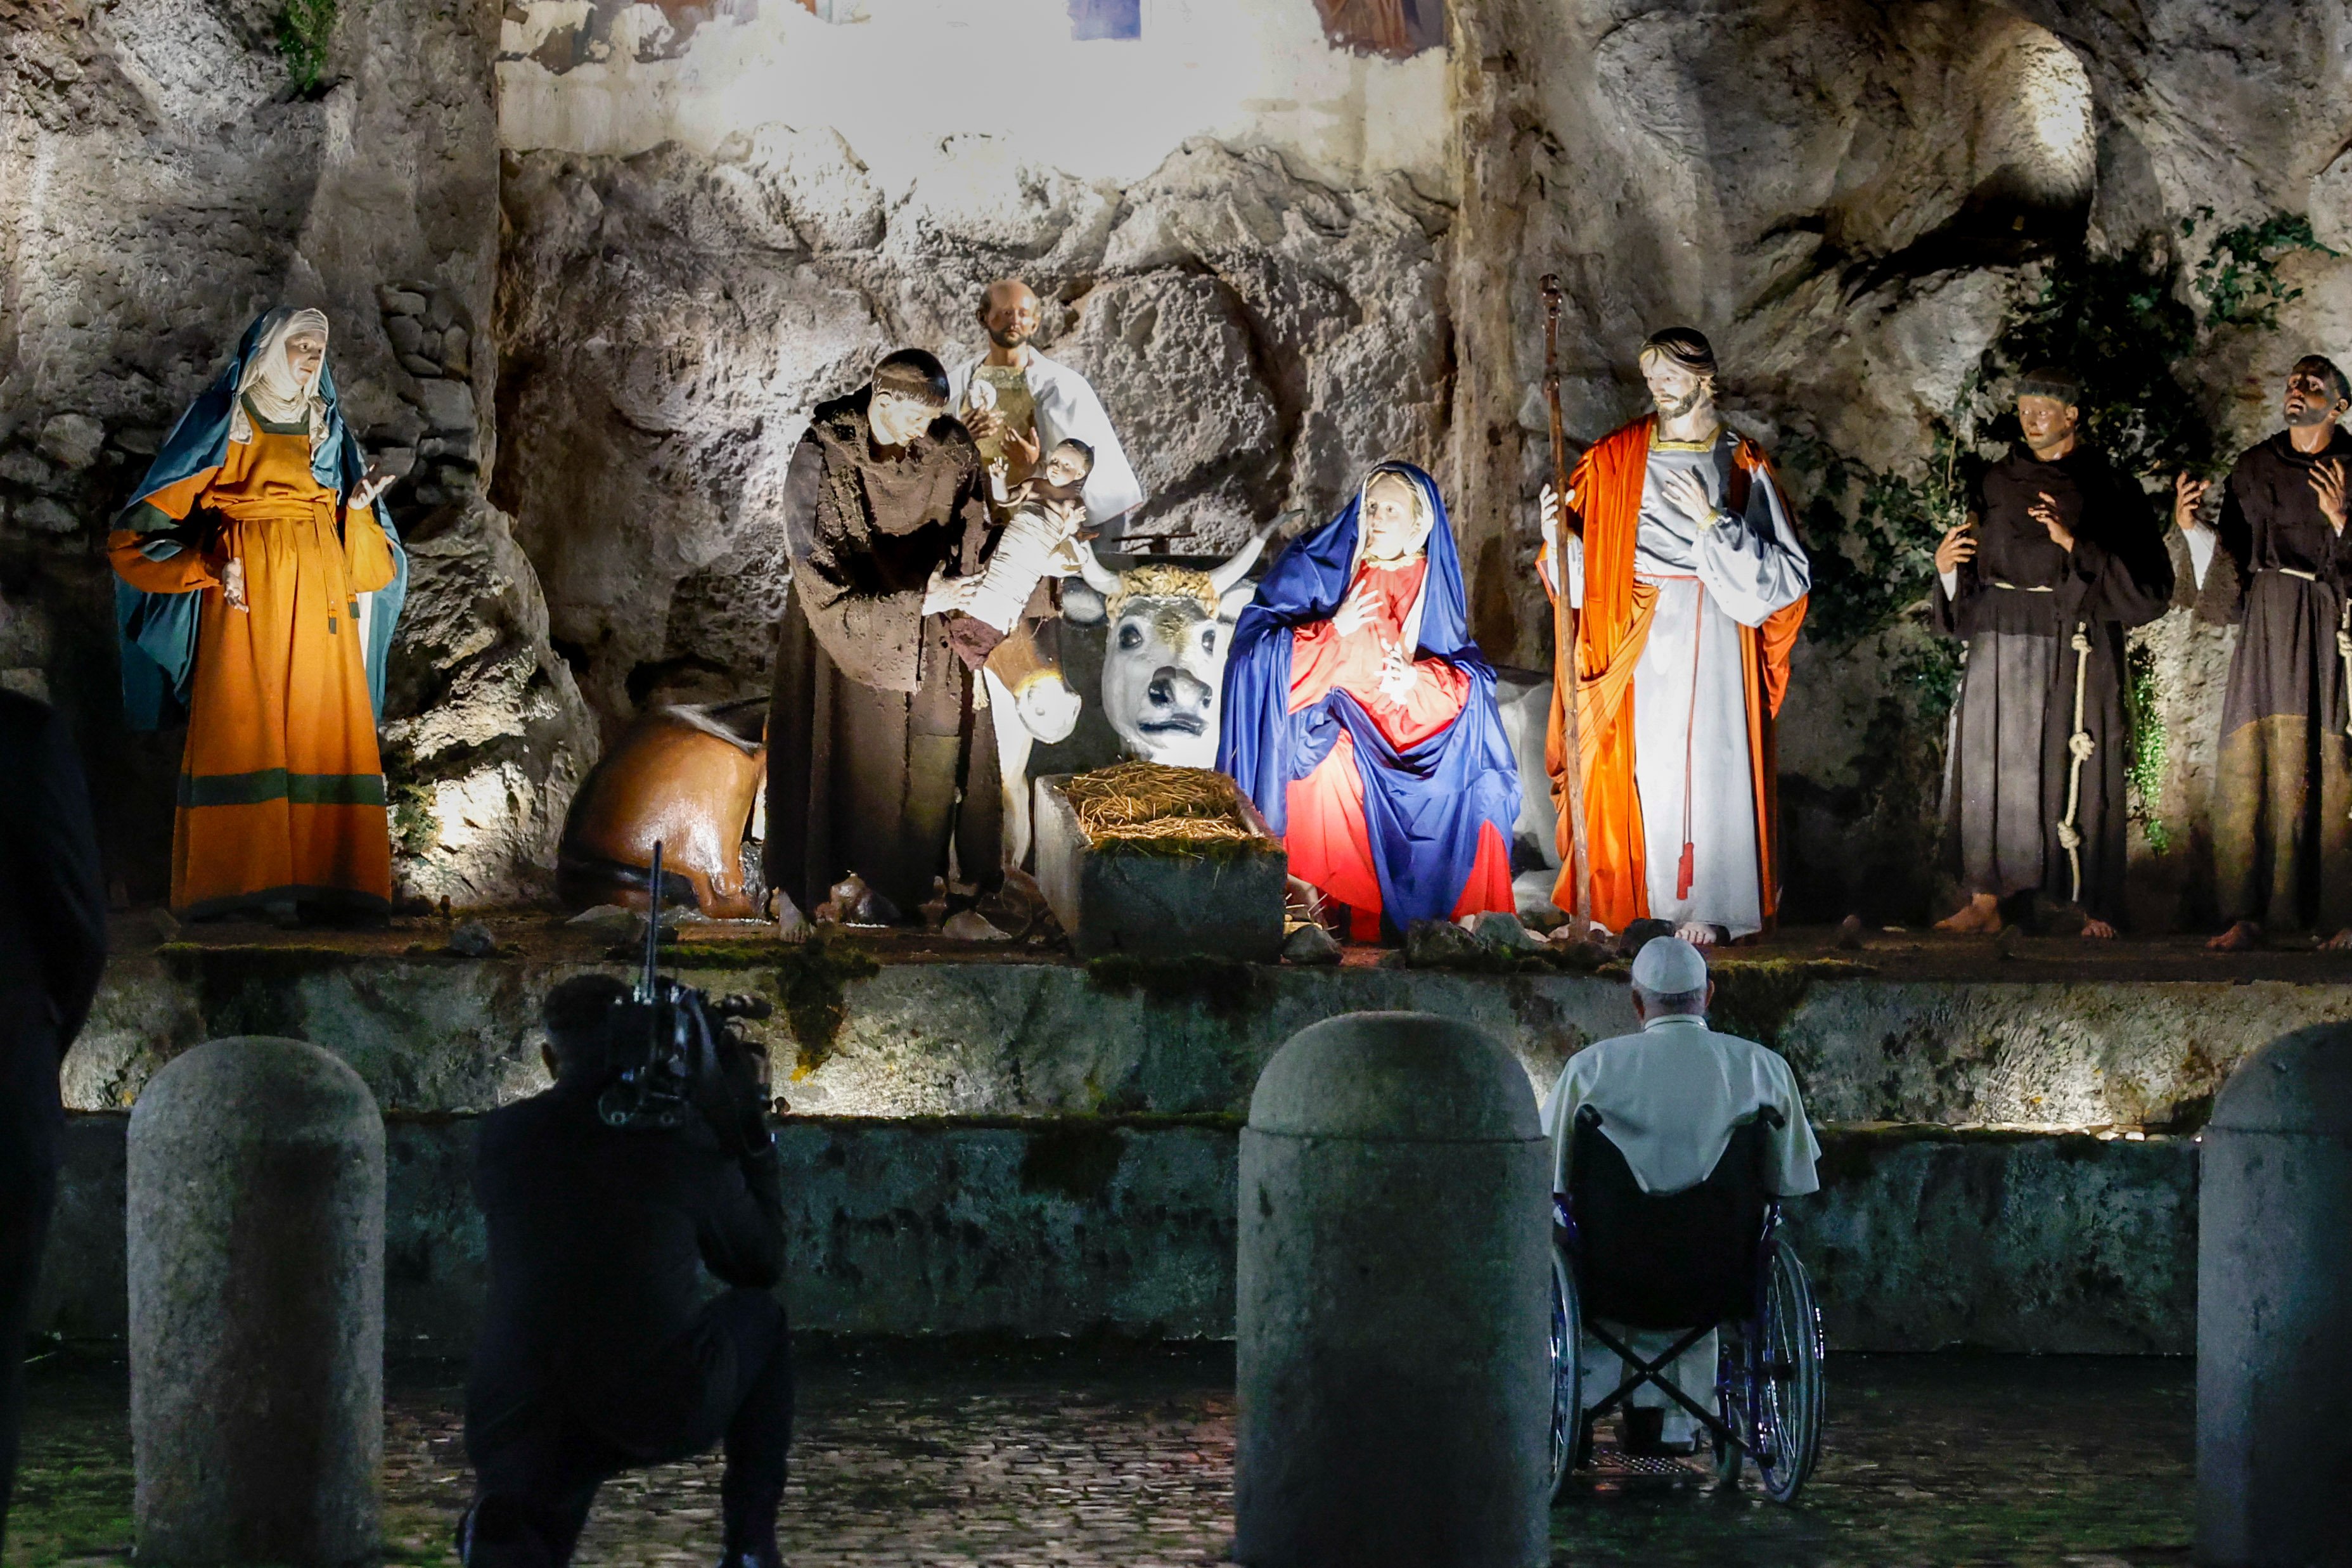 Pope Francis visits the Nativity scene in St. Peter's Square.